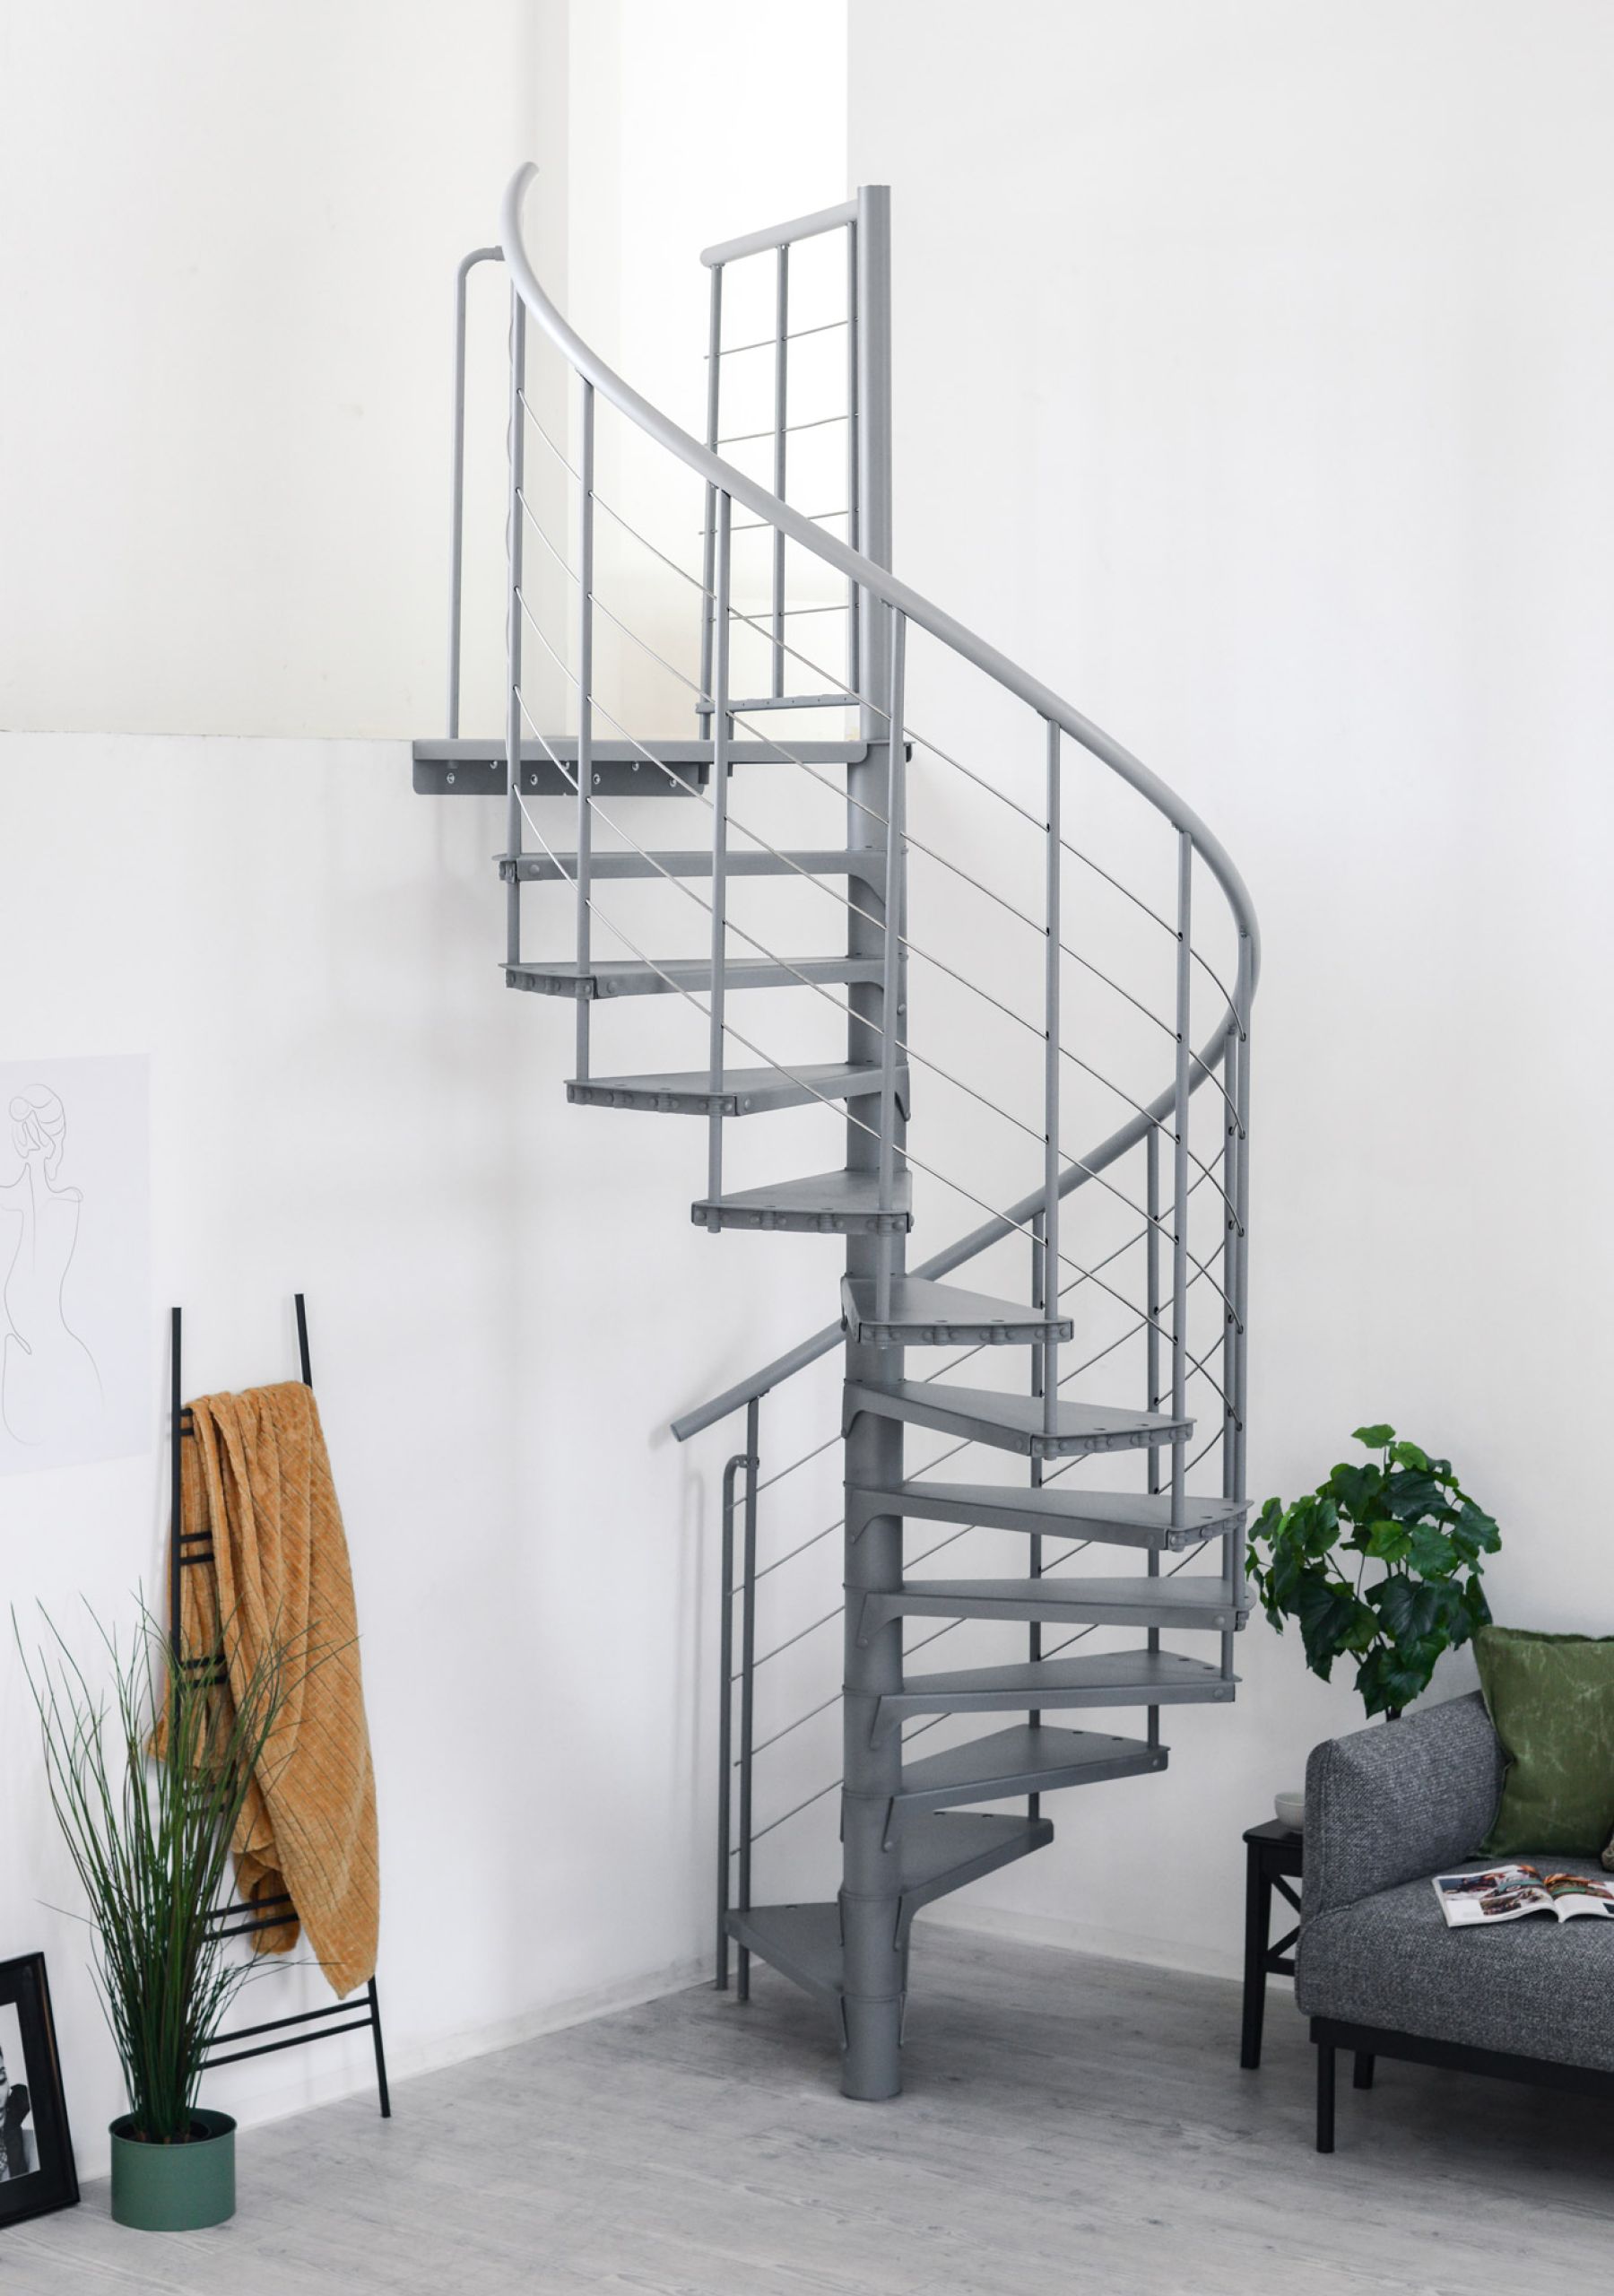 Spiral staircase Spino Smart